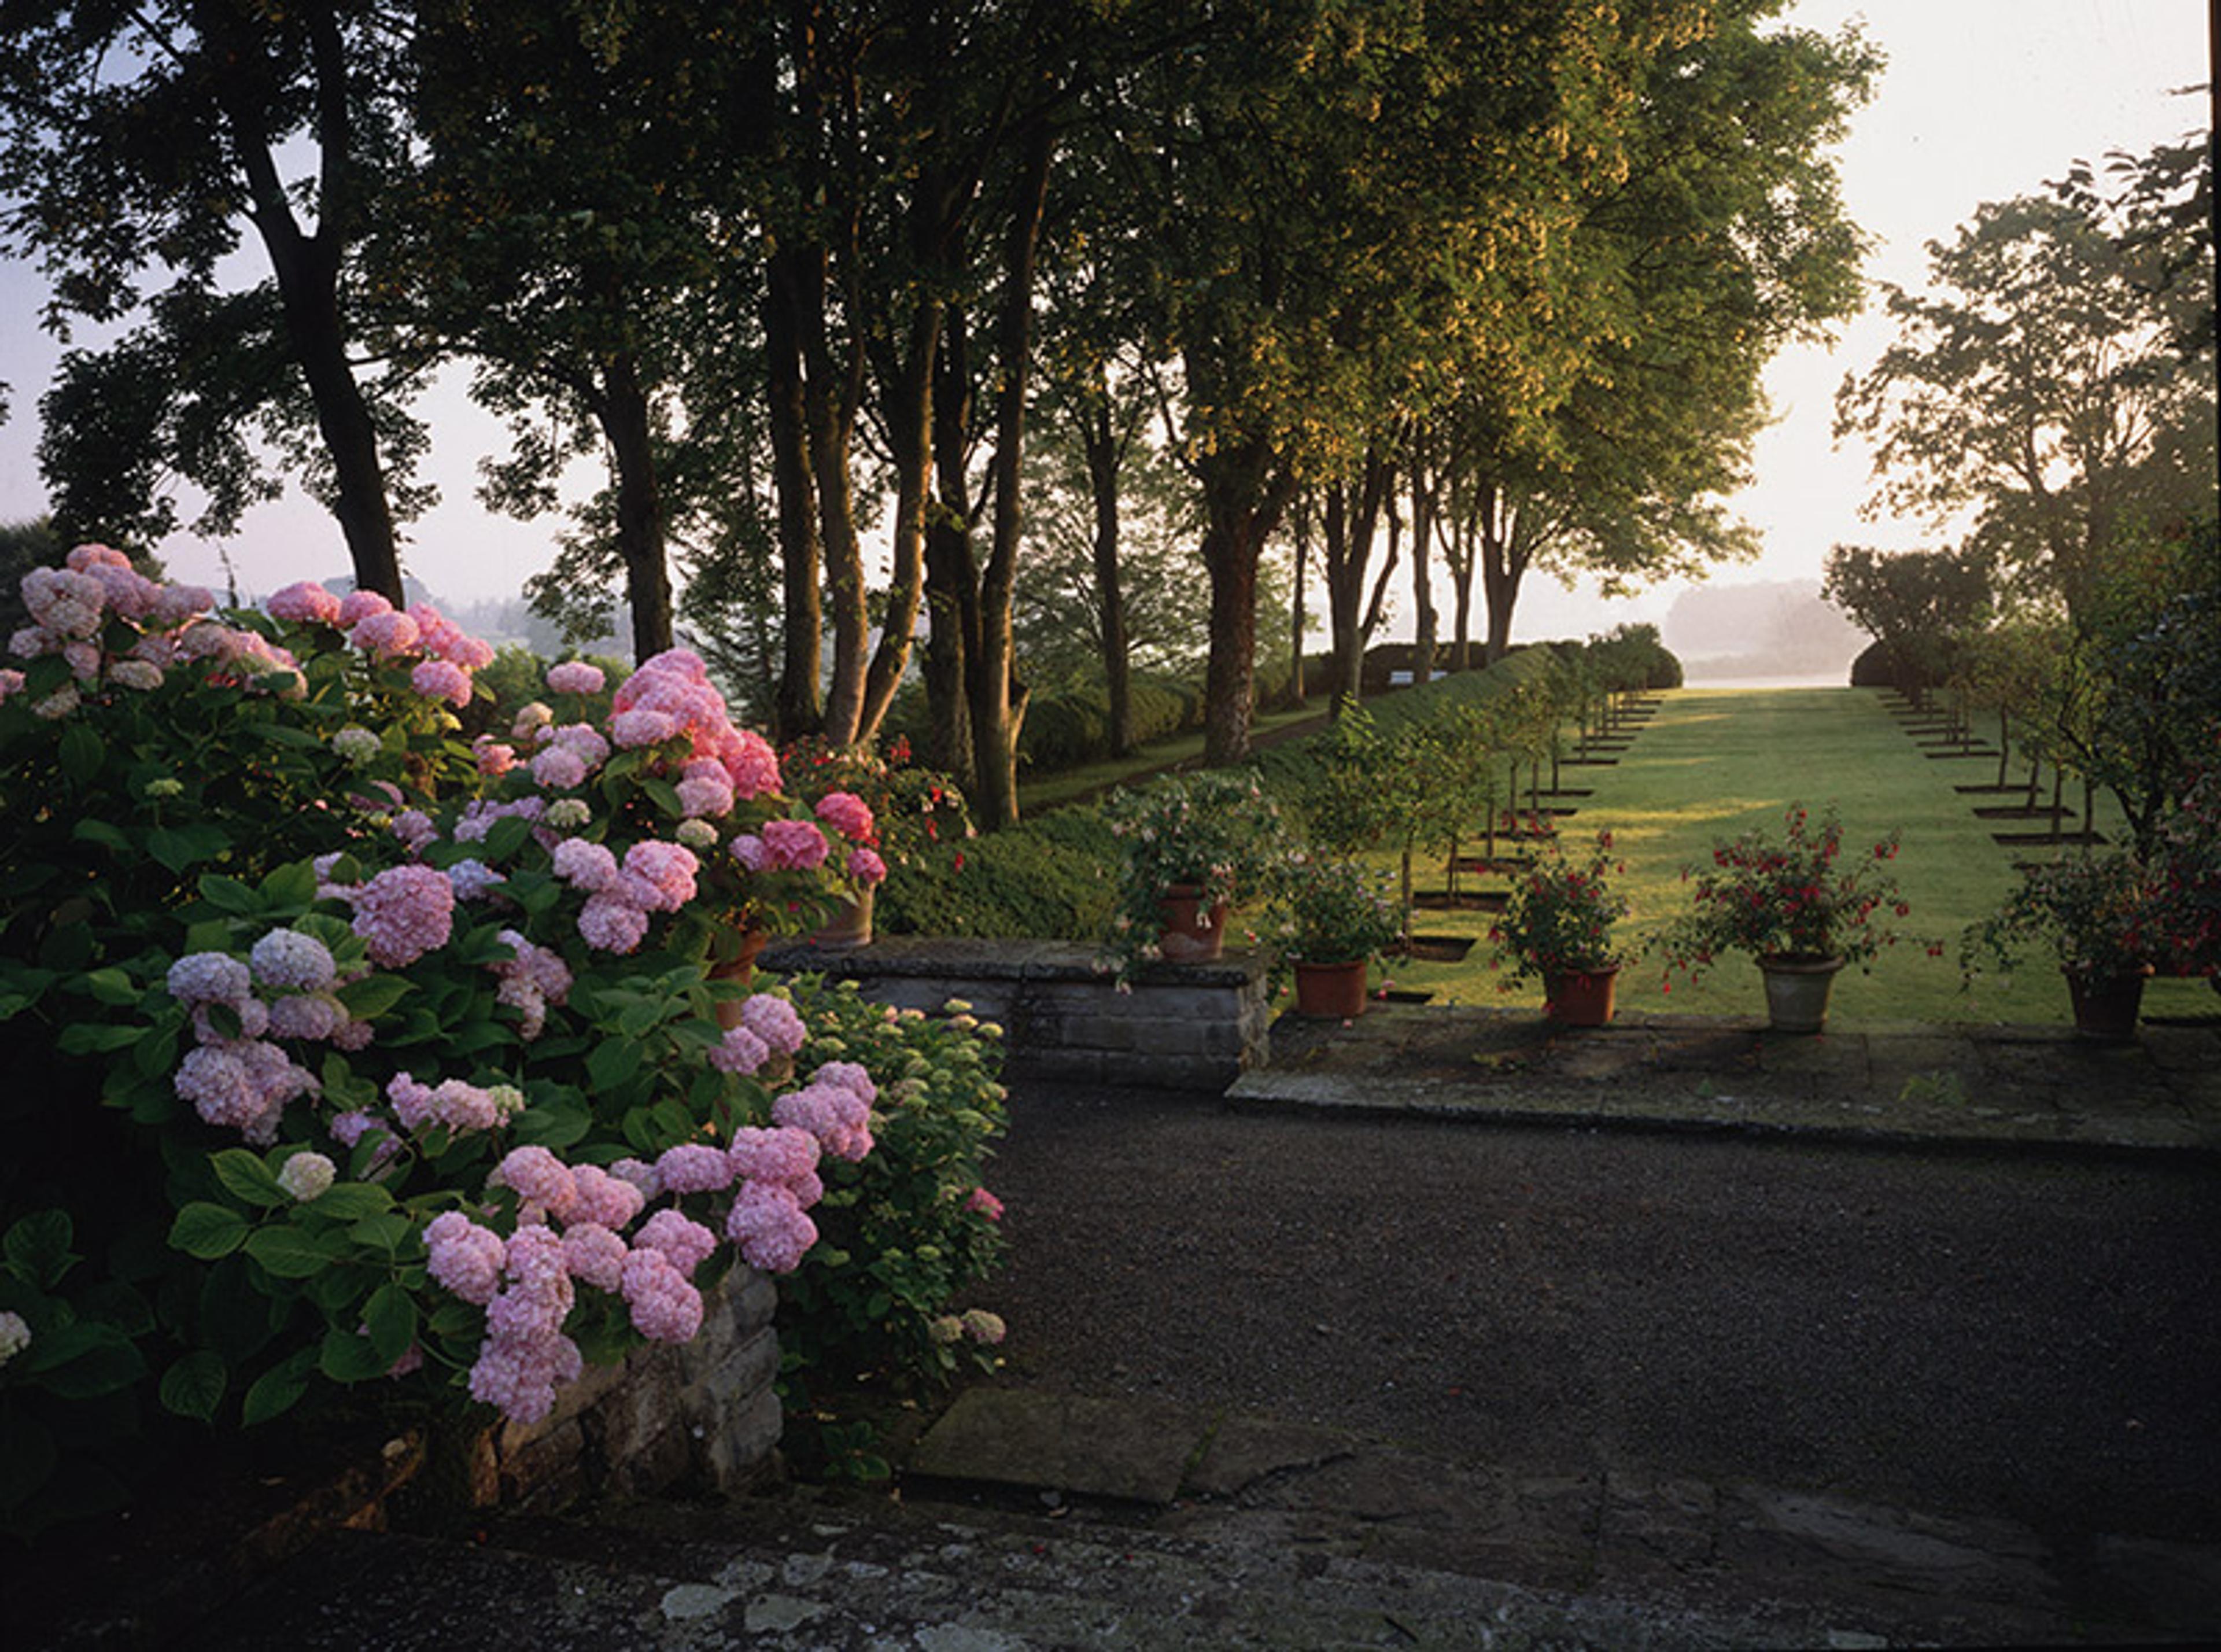 In the foreground pink hydrangeas bloom on a raised terrace above a formal lawn that leads to the distant lakeside. Trees shade the lawn